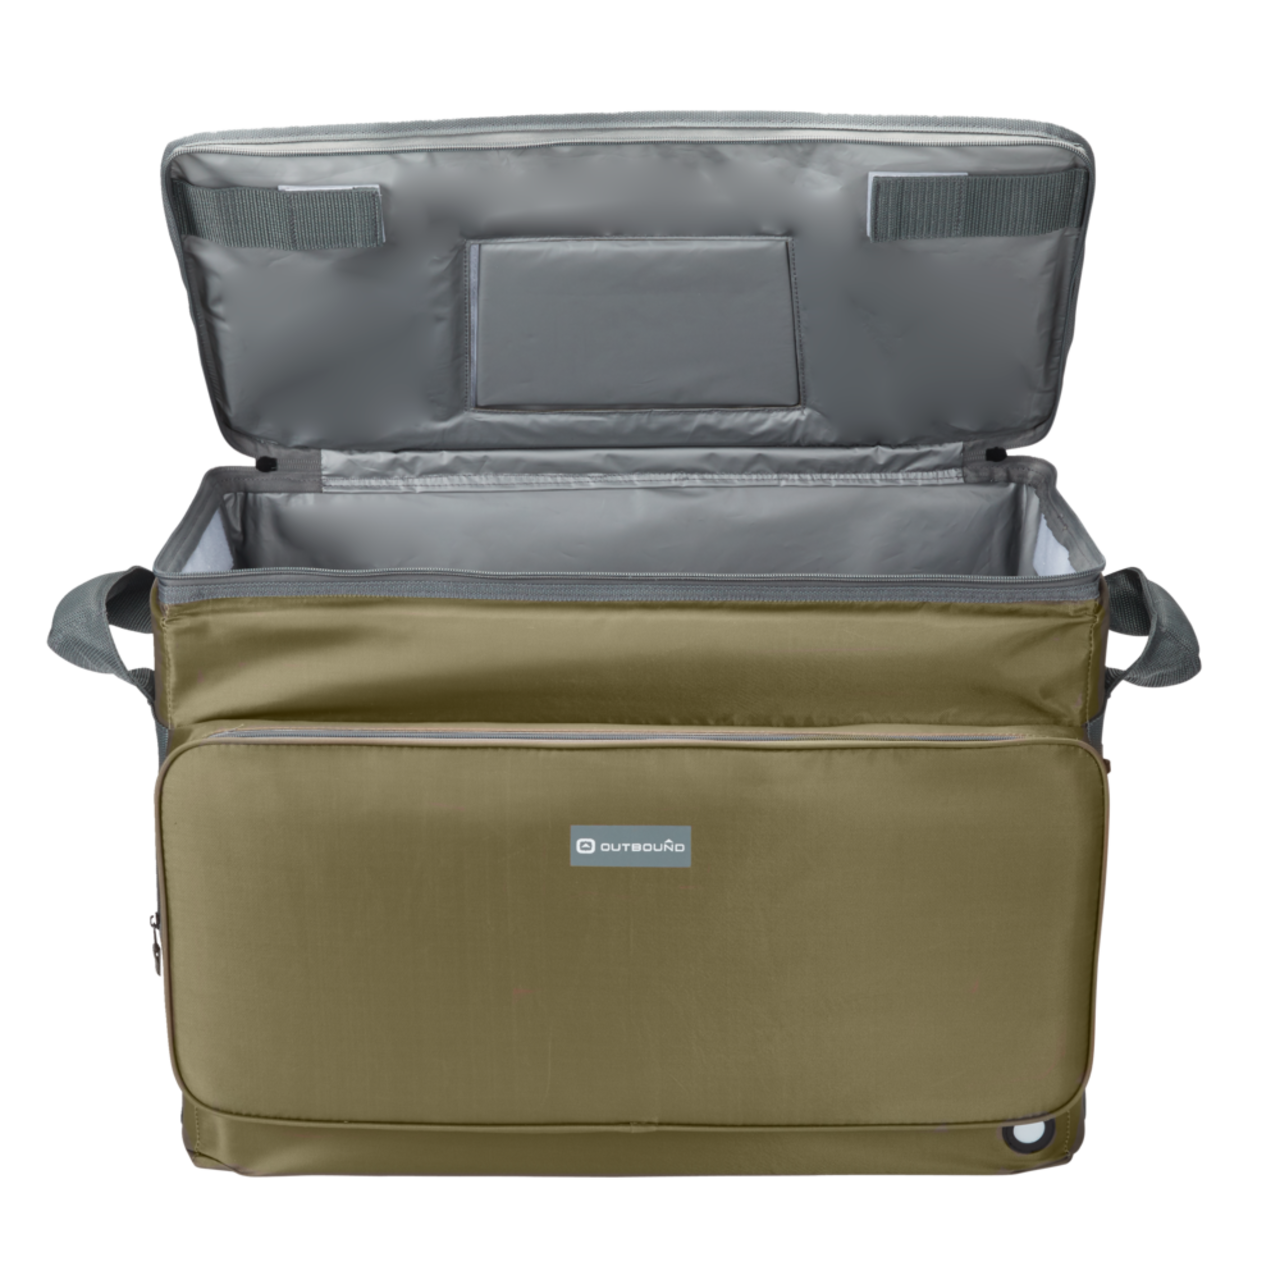 Outbound Small Collapsible Soft Cooler, 24 Can Capacity, 40-L, Olive/Green